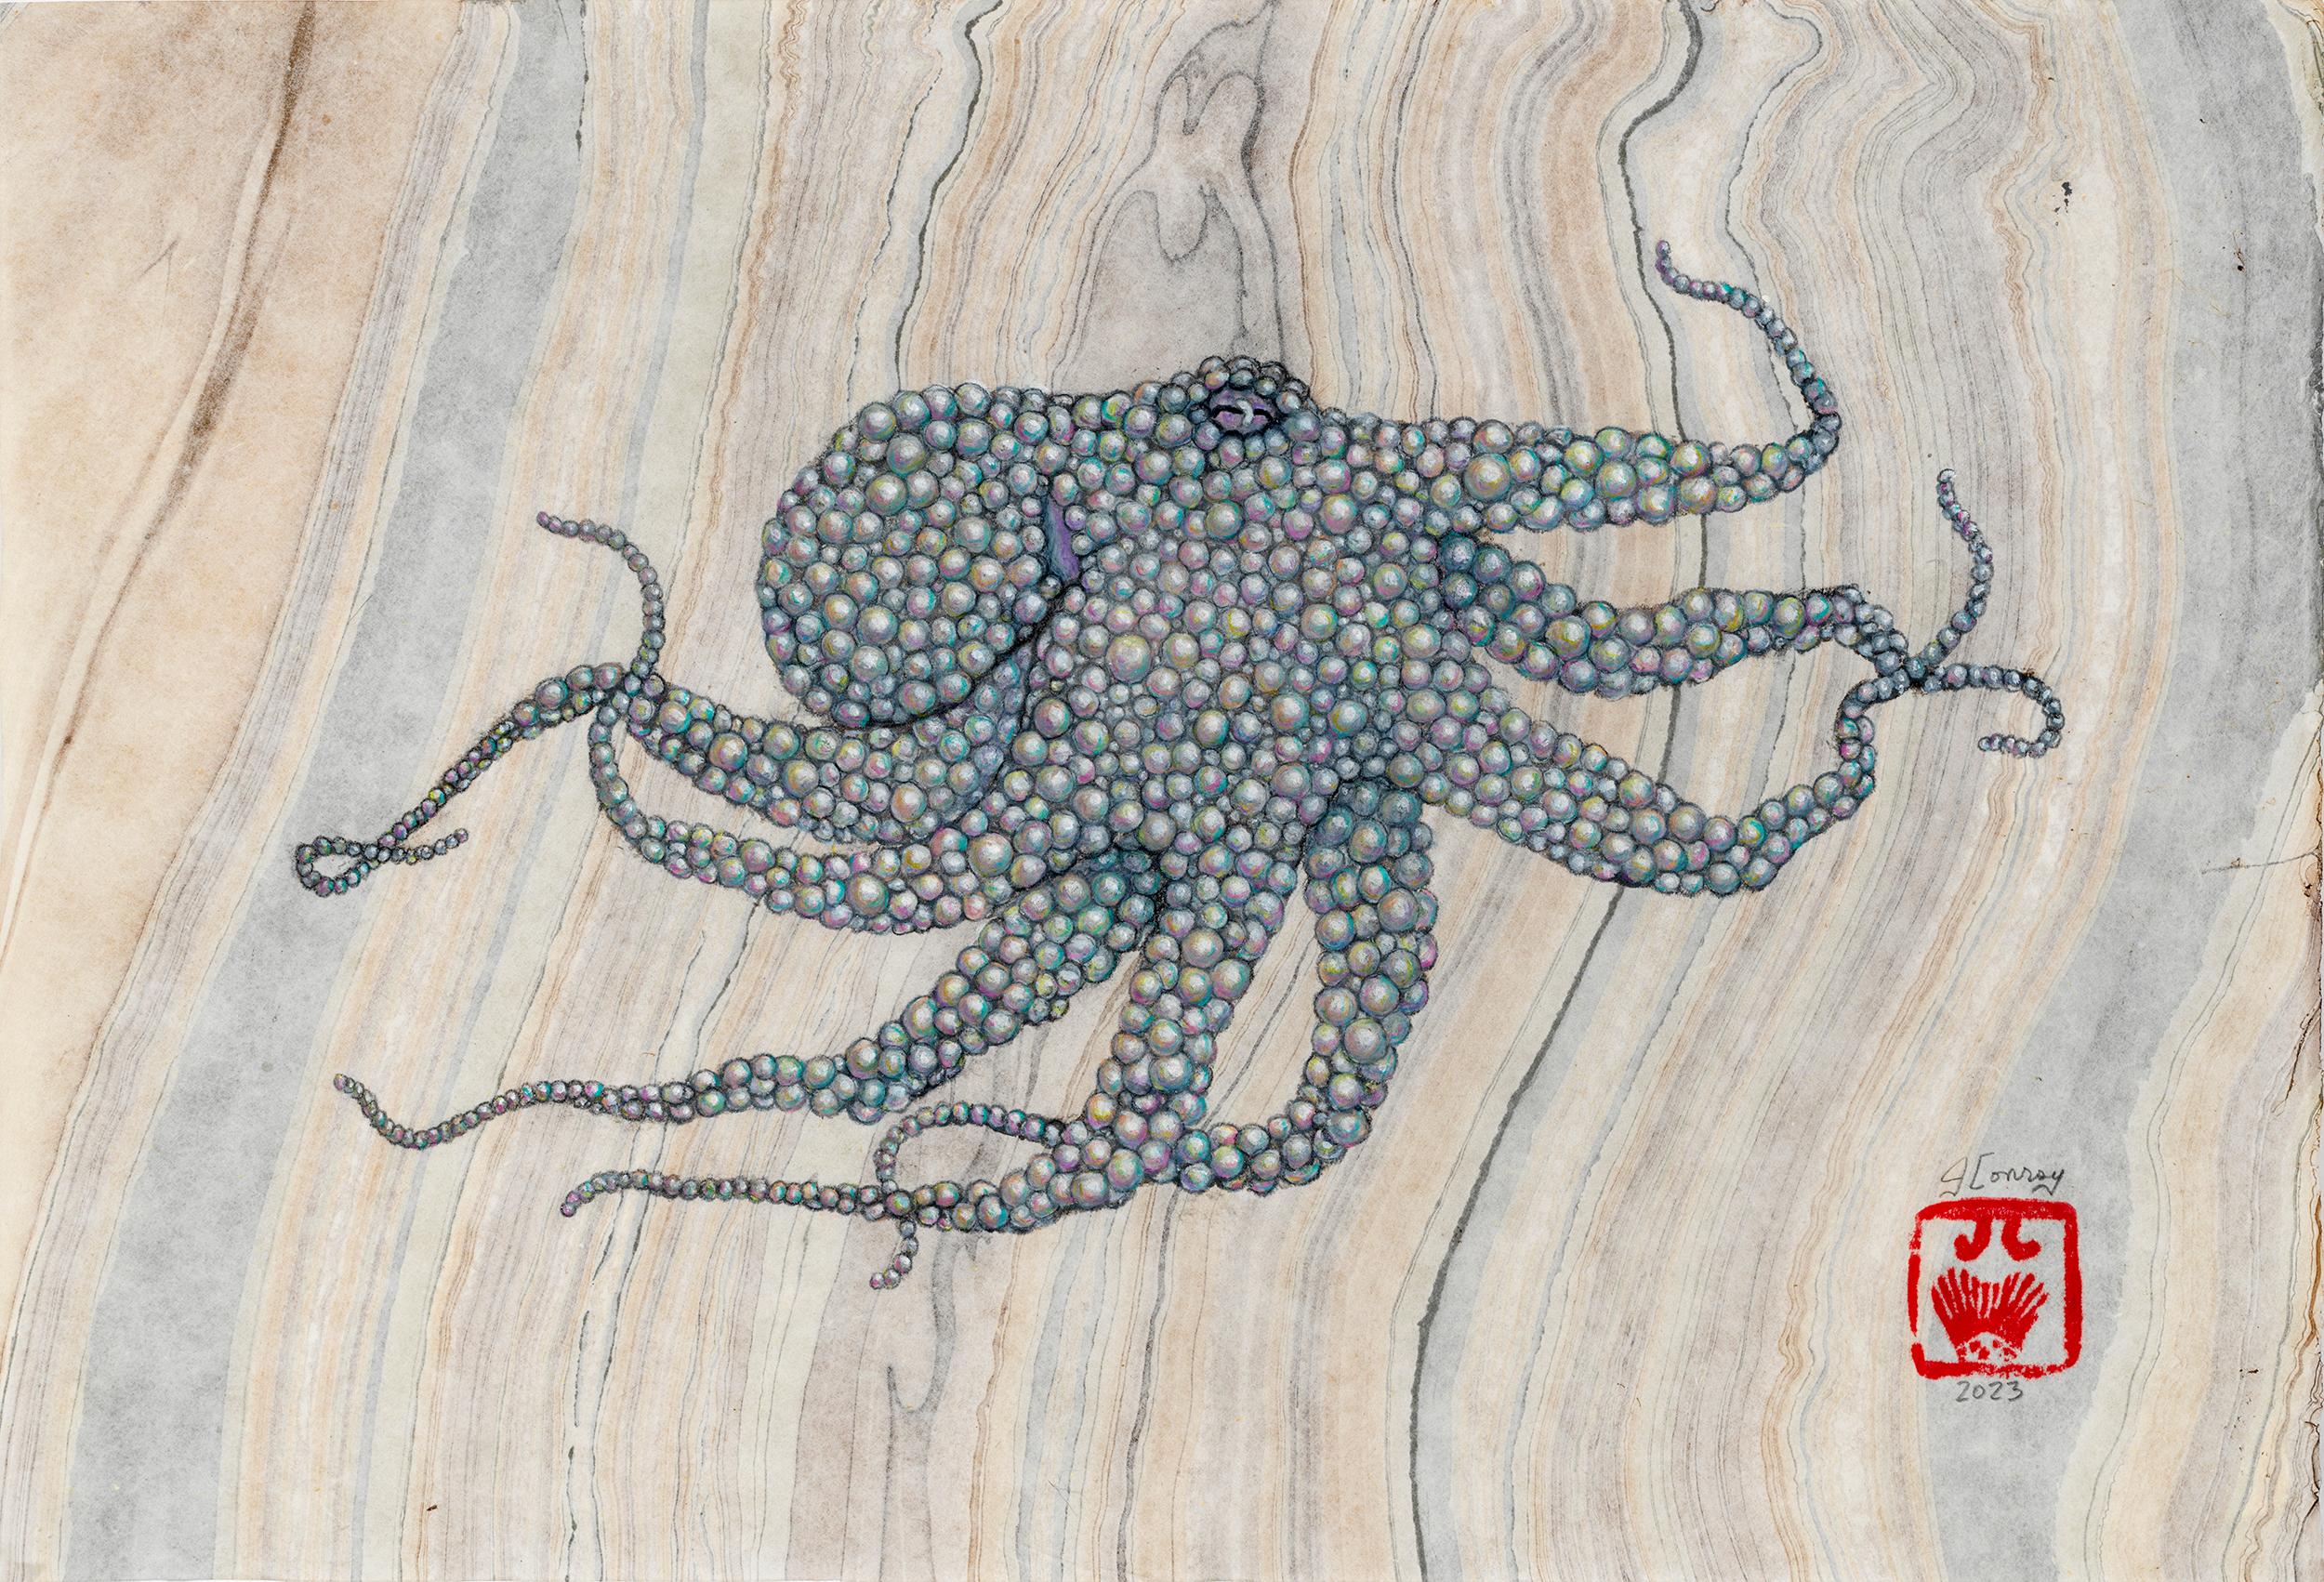 String of Pearls - Gyotaku Style Sumi Ink Painting of an Octopus, Mulberry Paper